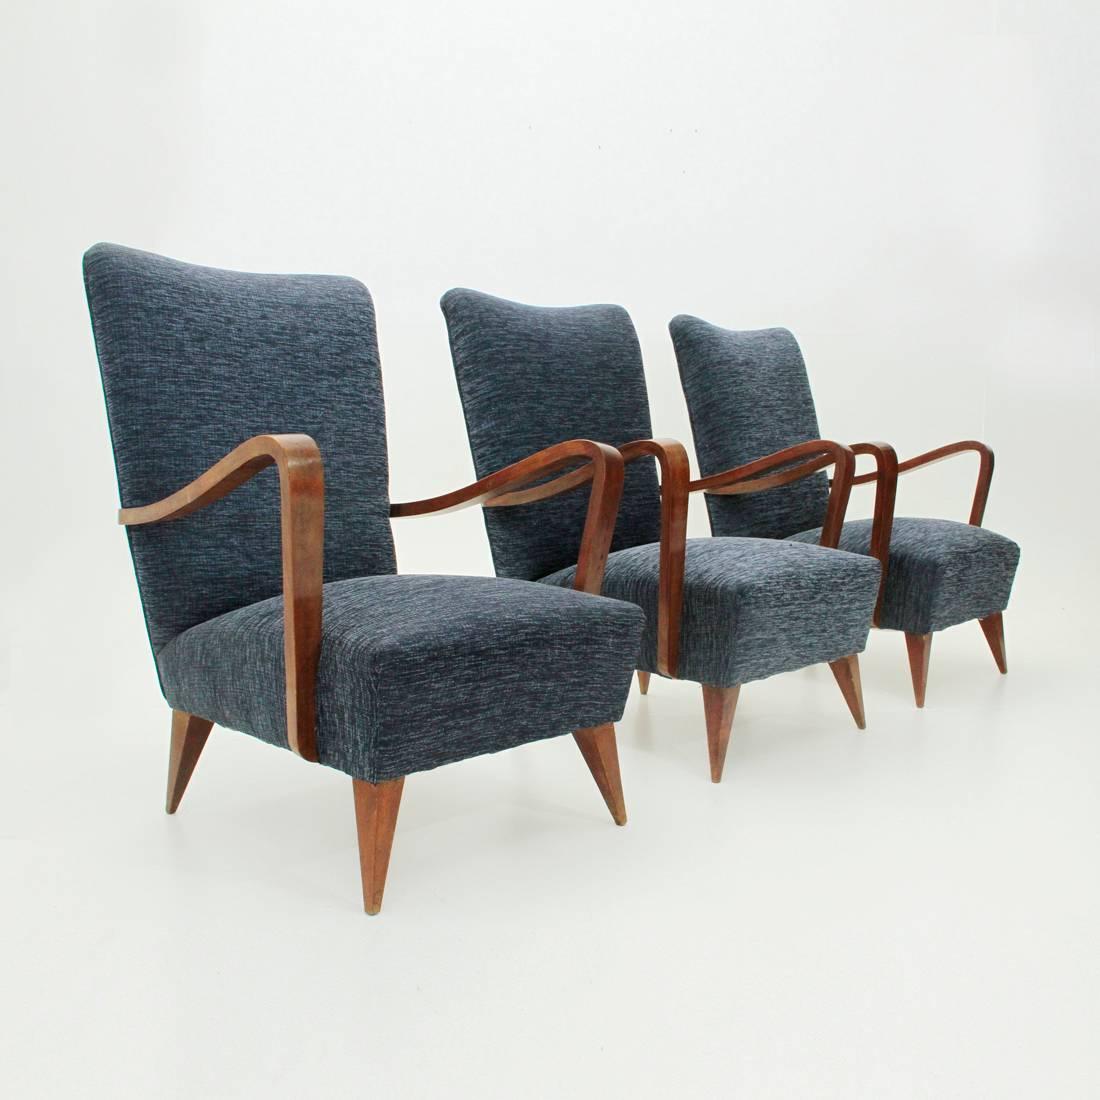 Set of three Italian armchairs produced in the 1940s.
Wooden structure padded and lined with new fabric.
Legs and armrests in wood.
Good general conditions, some signs due to normal use over time.

Dimensions: Width 69 cm, depth 80 cm, height